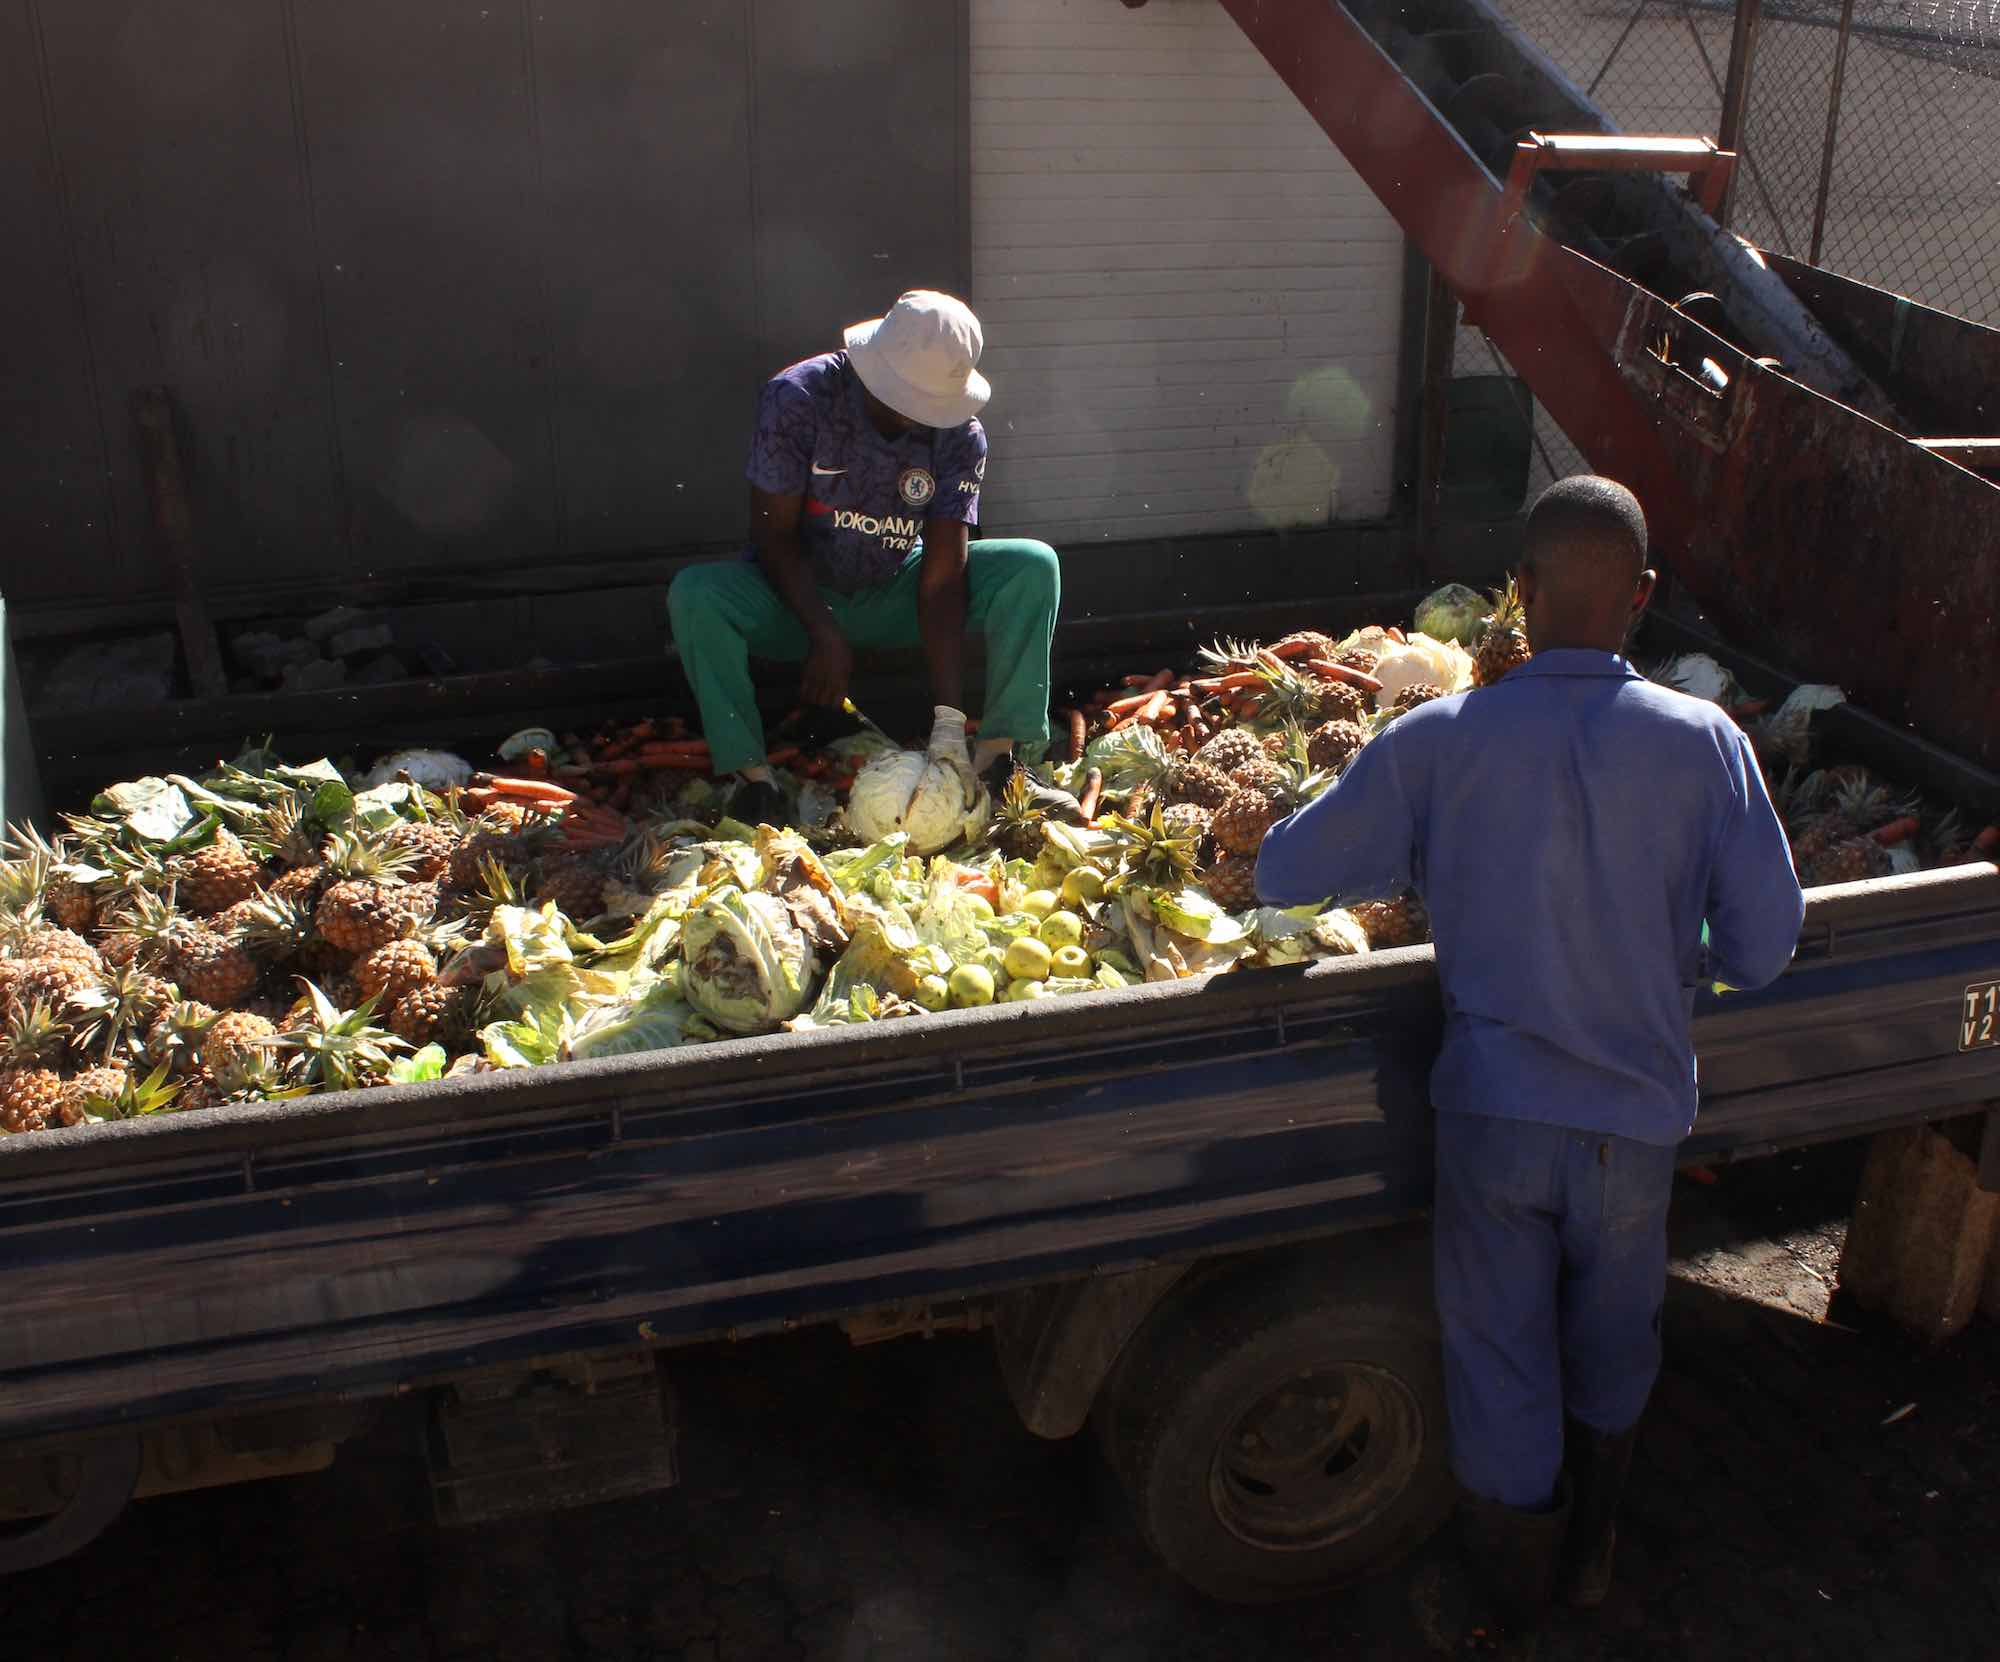 Two men sort through organic waste (mainly fruit and vegetables) in the back of an open lorry.